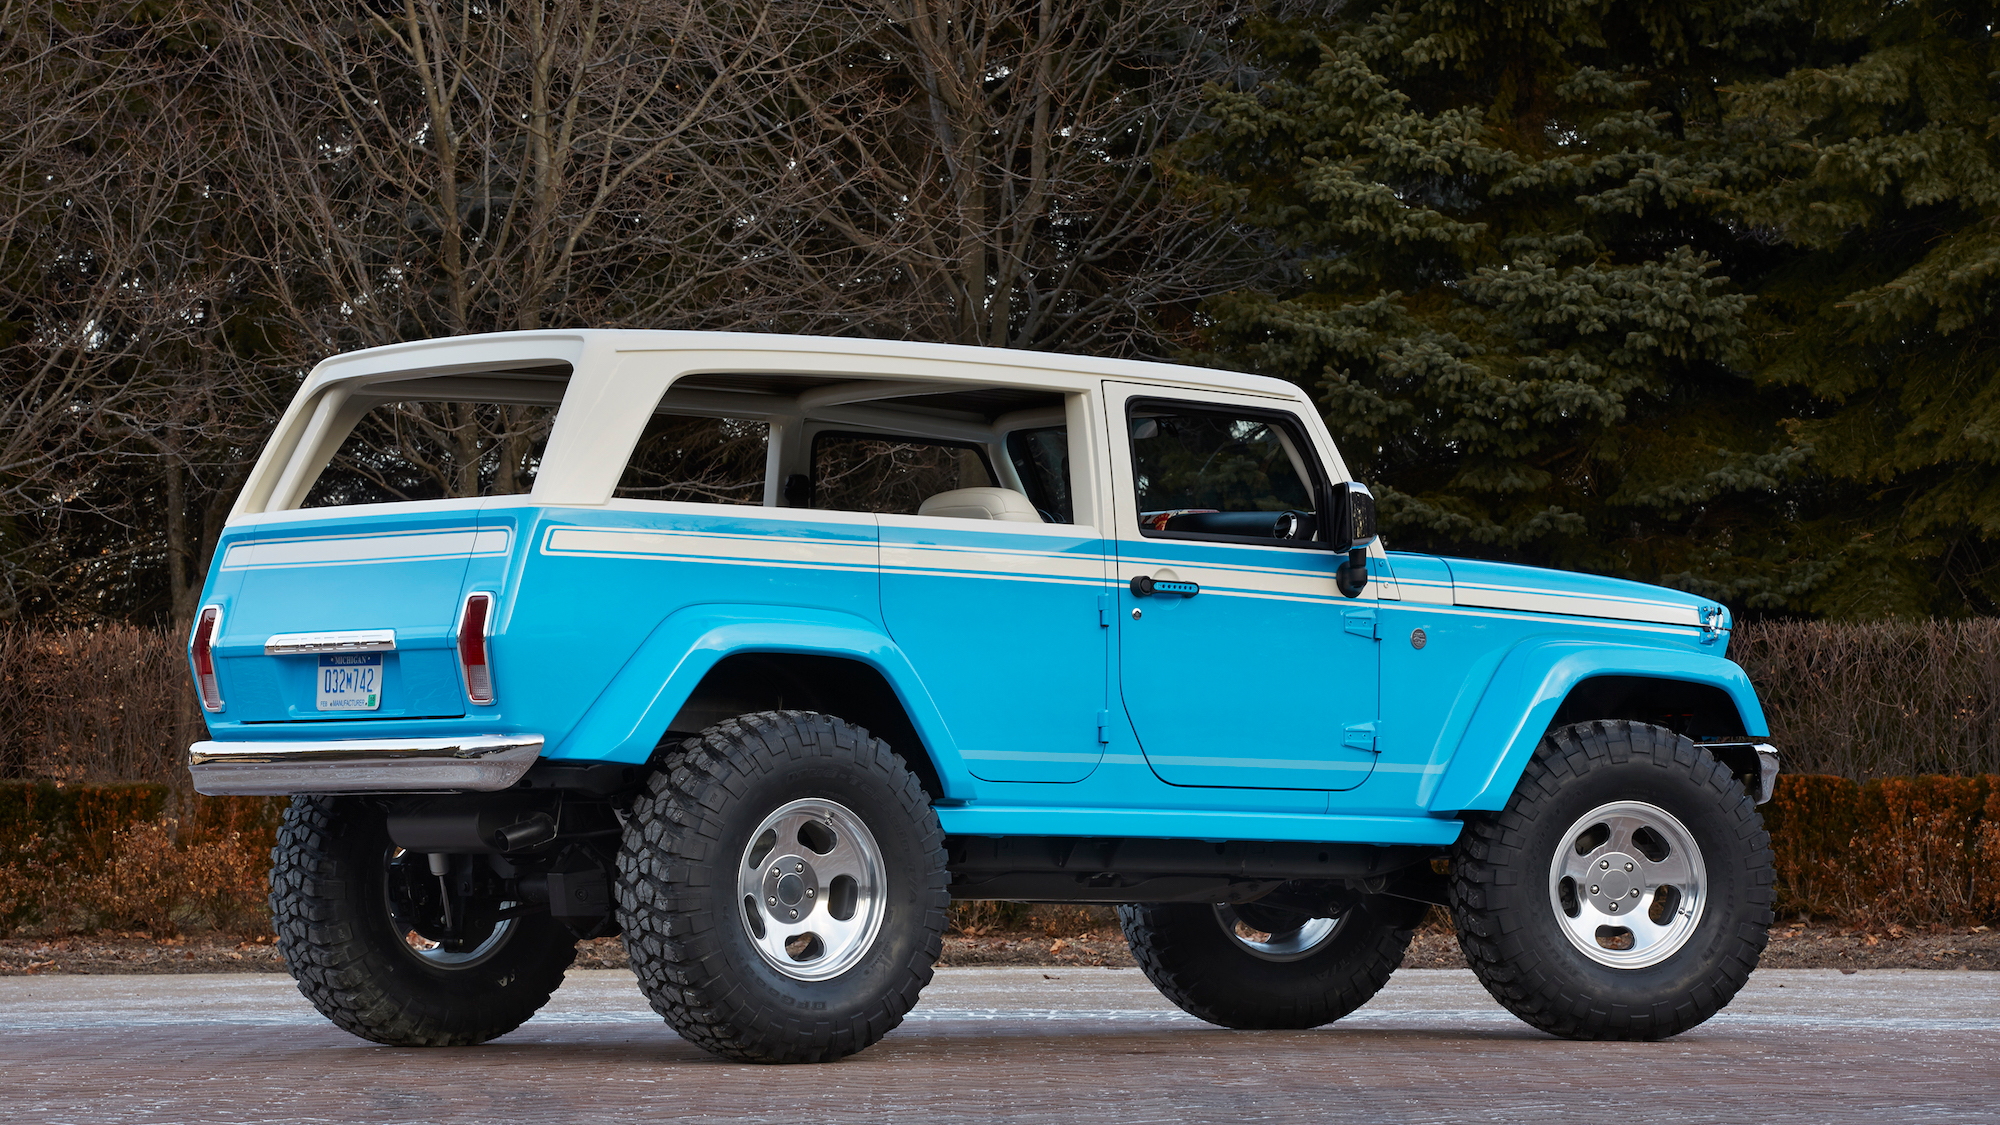 Jeep Chief concept for Moab Easter Jeep Safari, 2015